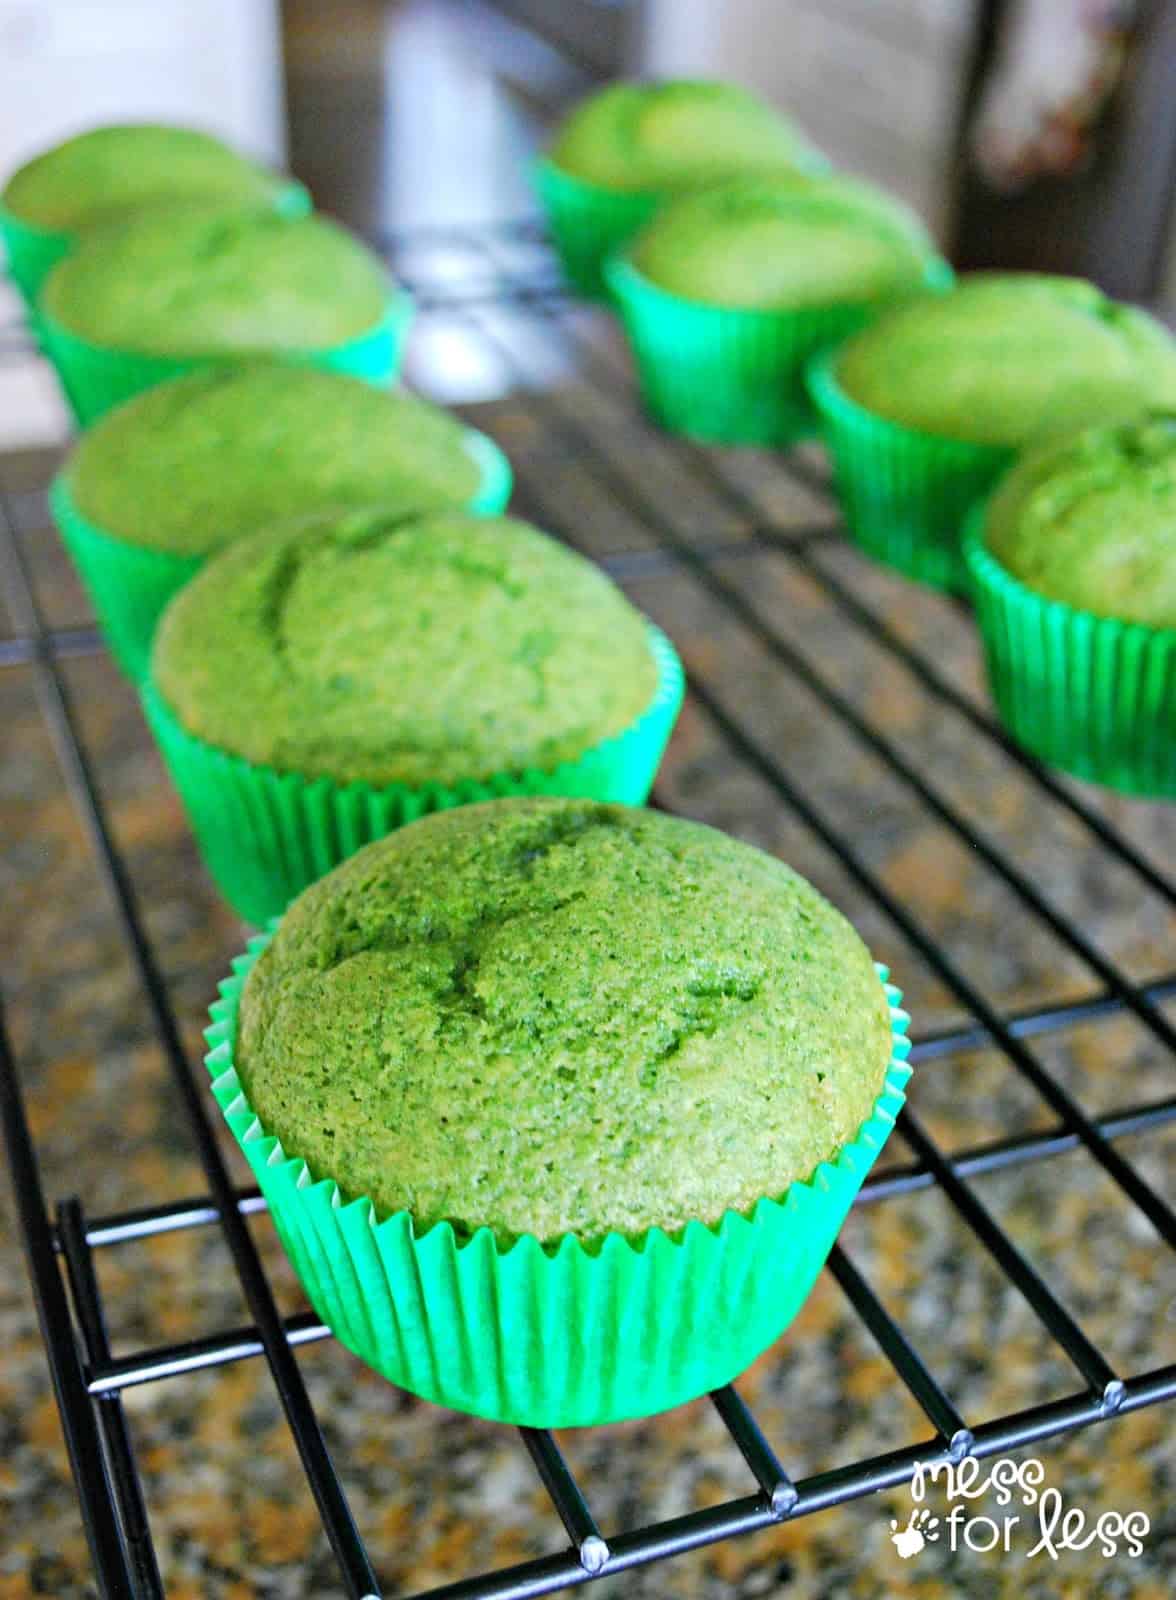 Spinach Muffin Recipe - Healthy and Delicious!